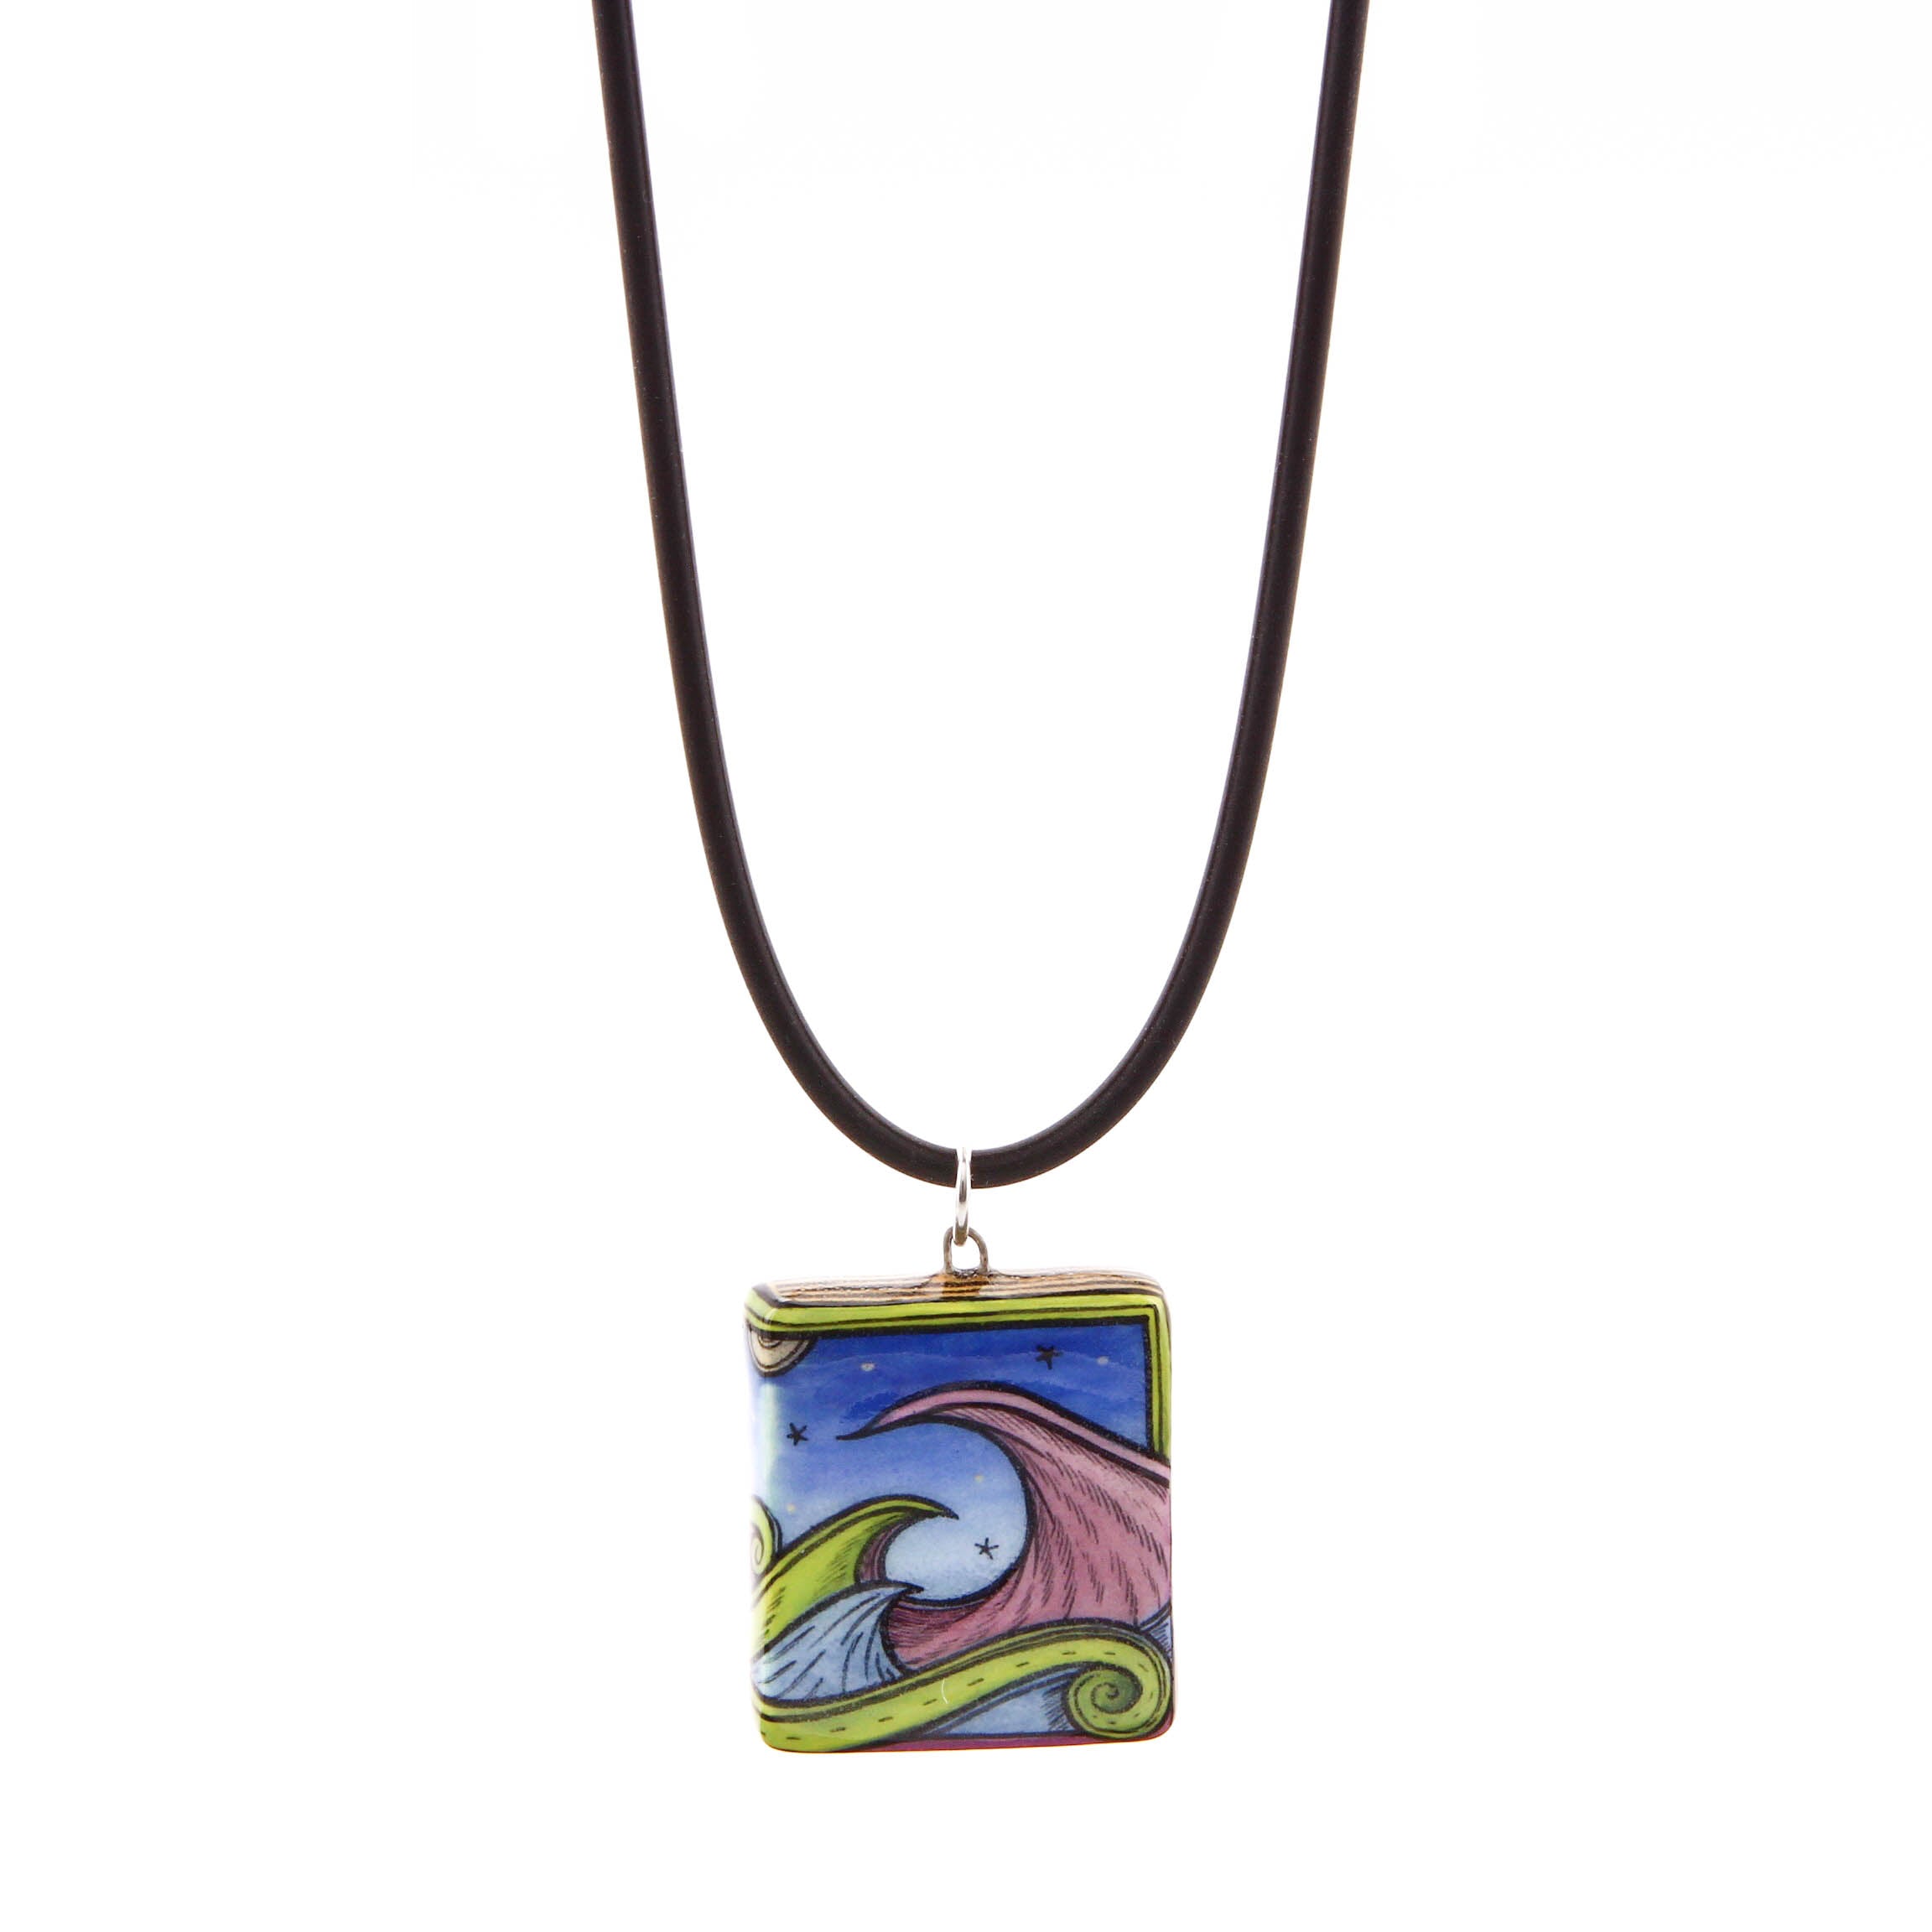 Terri Kern, Ceramic Necklace with Waves with Silicon Band